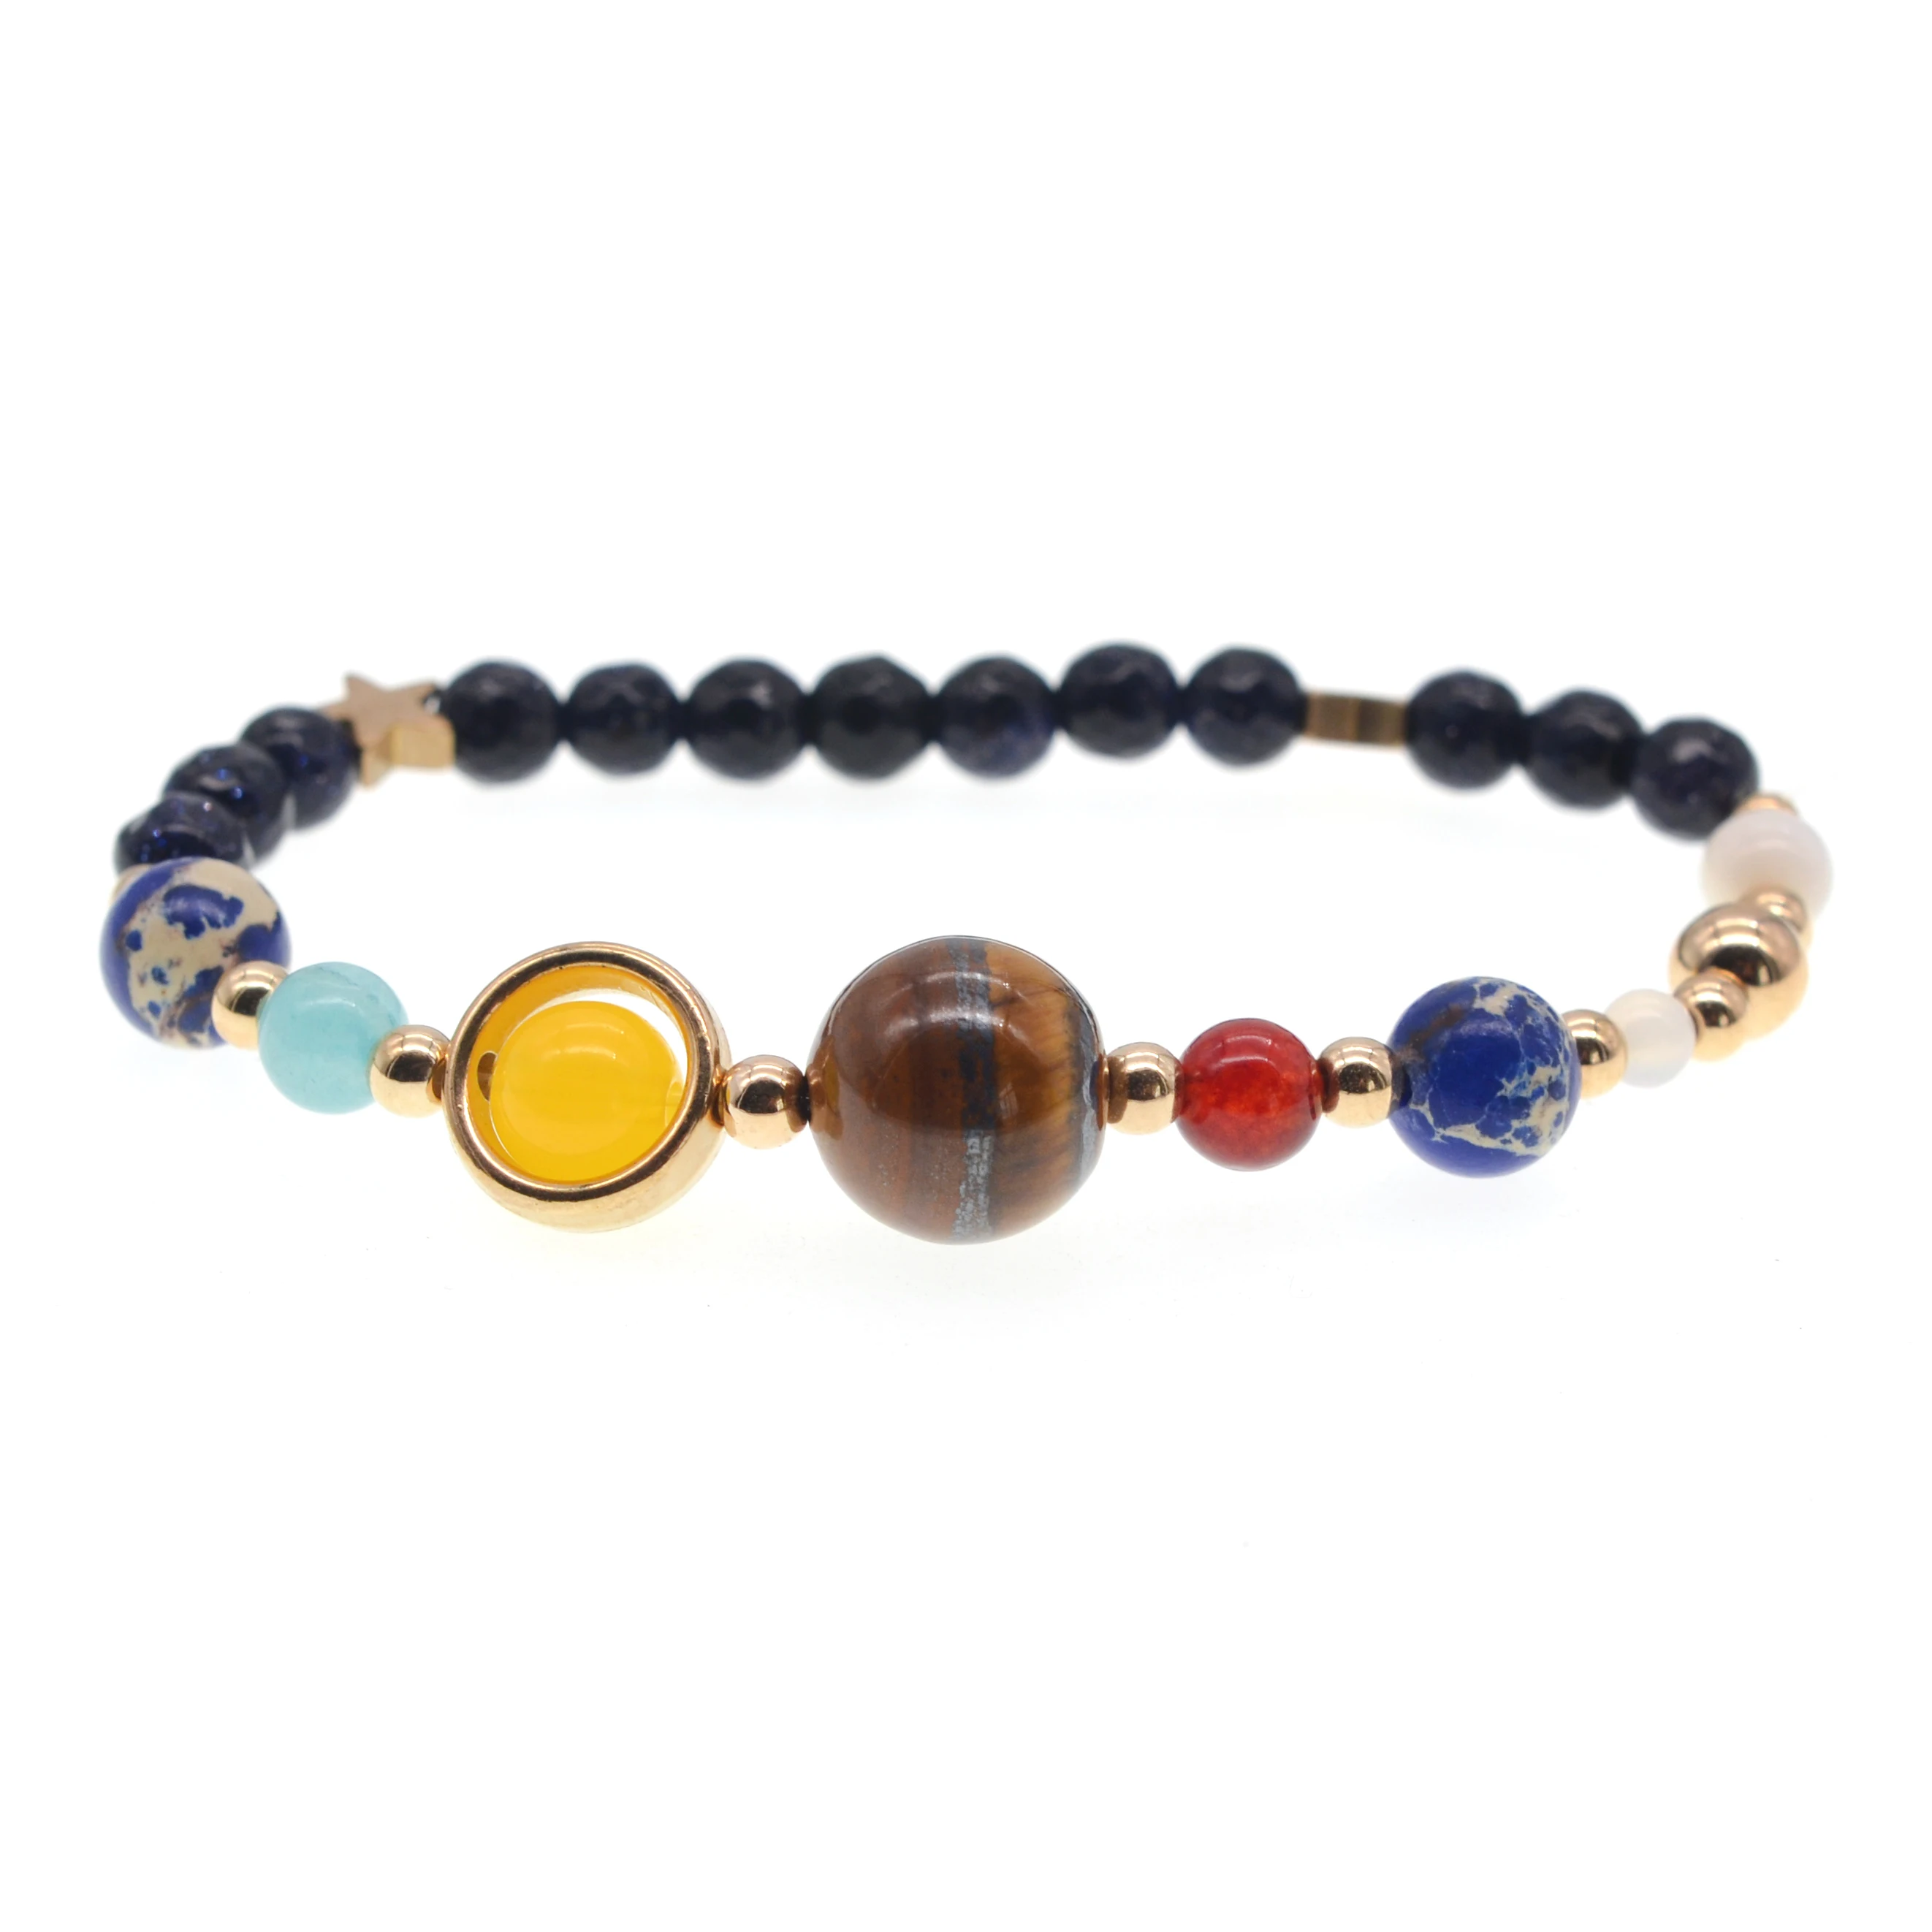 

Colorful Yoga Solar System Eight Planets Bracelet Mens Bracelets 2018 Women Fashion Gifts For